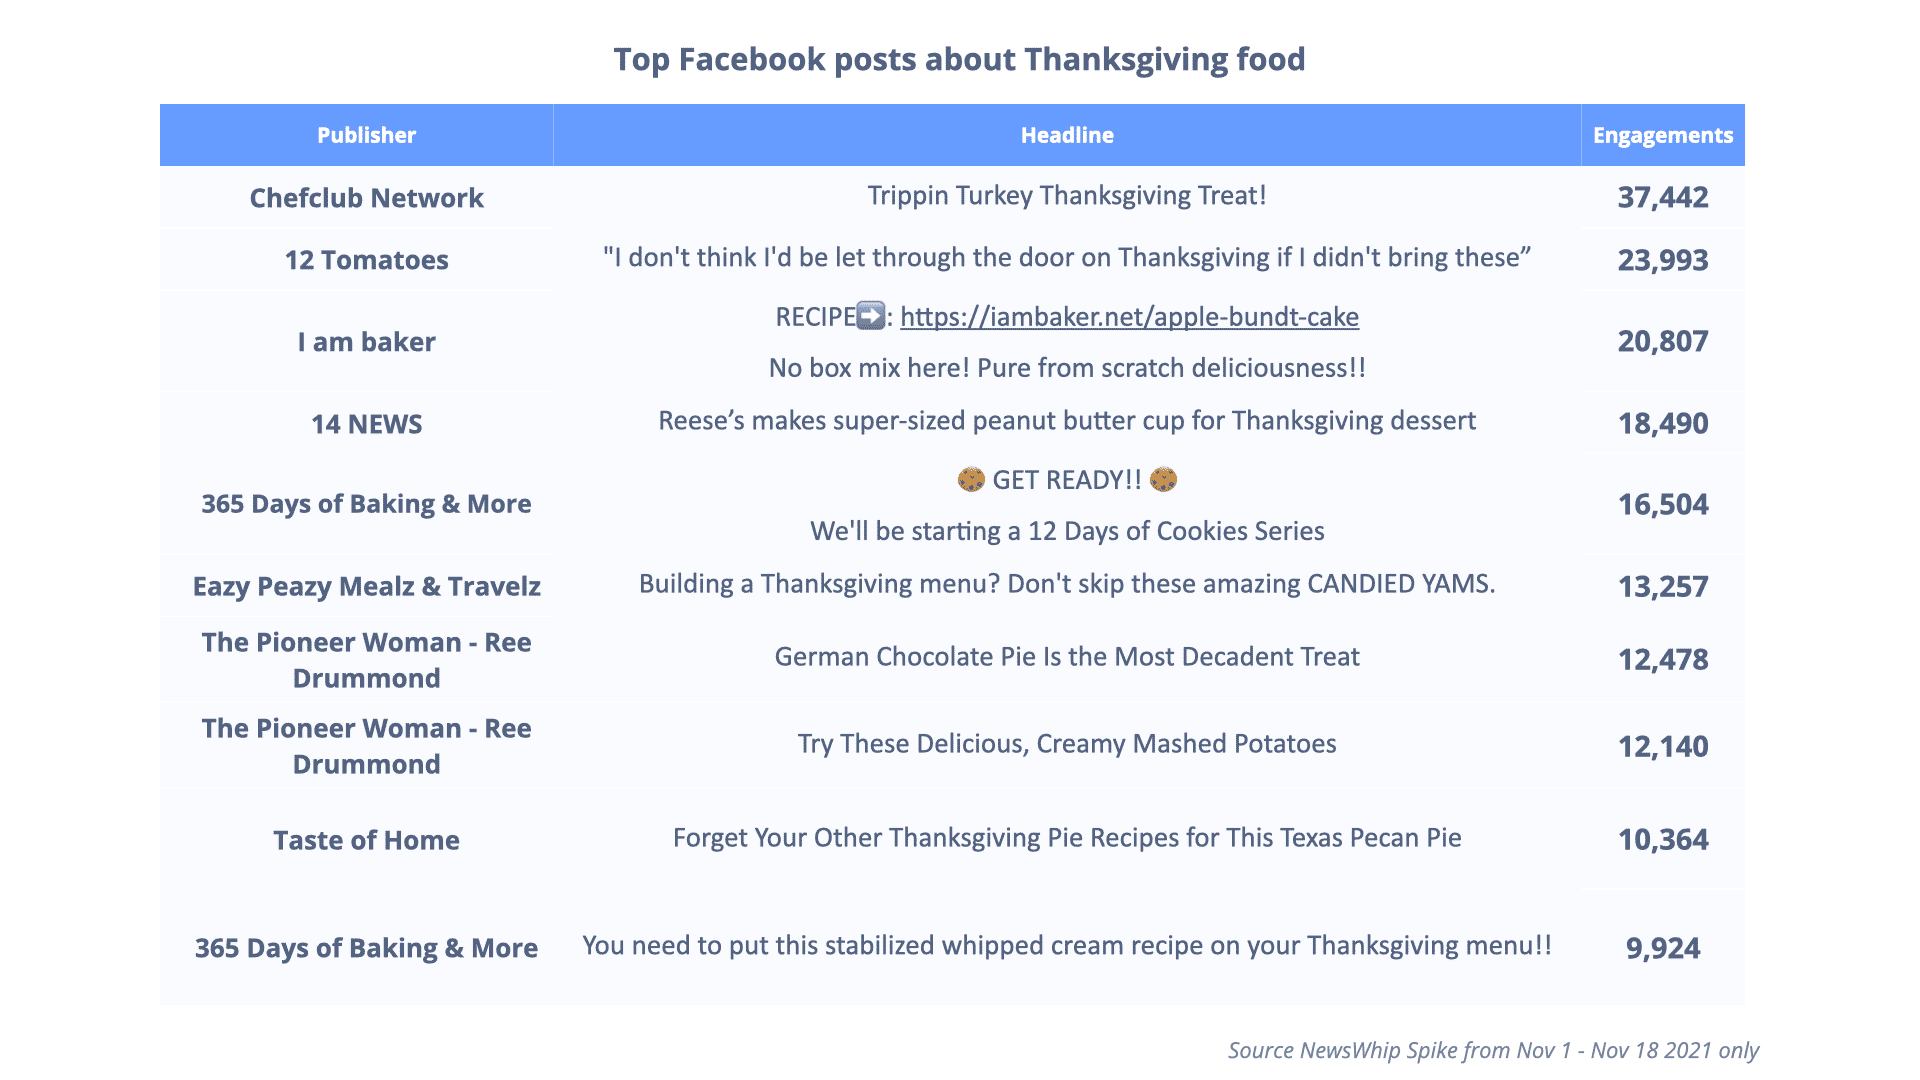 graph showing top Facebook posts about thanksgiving food